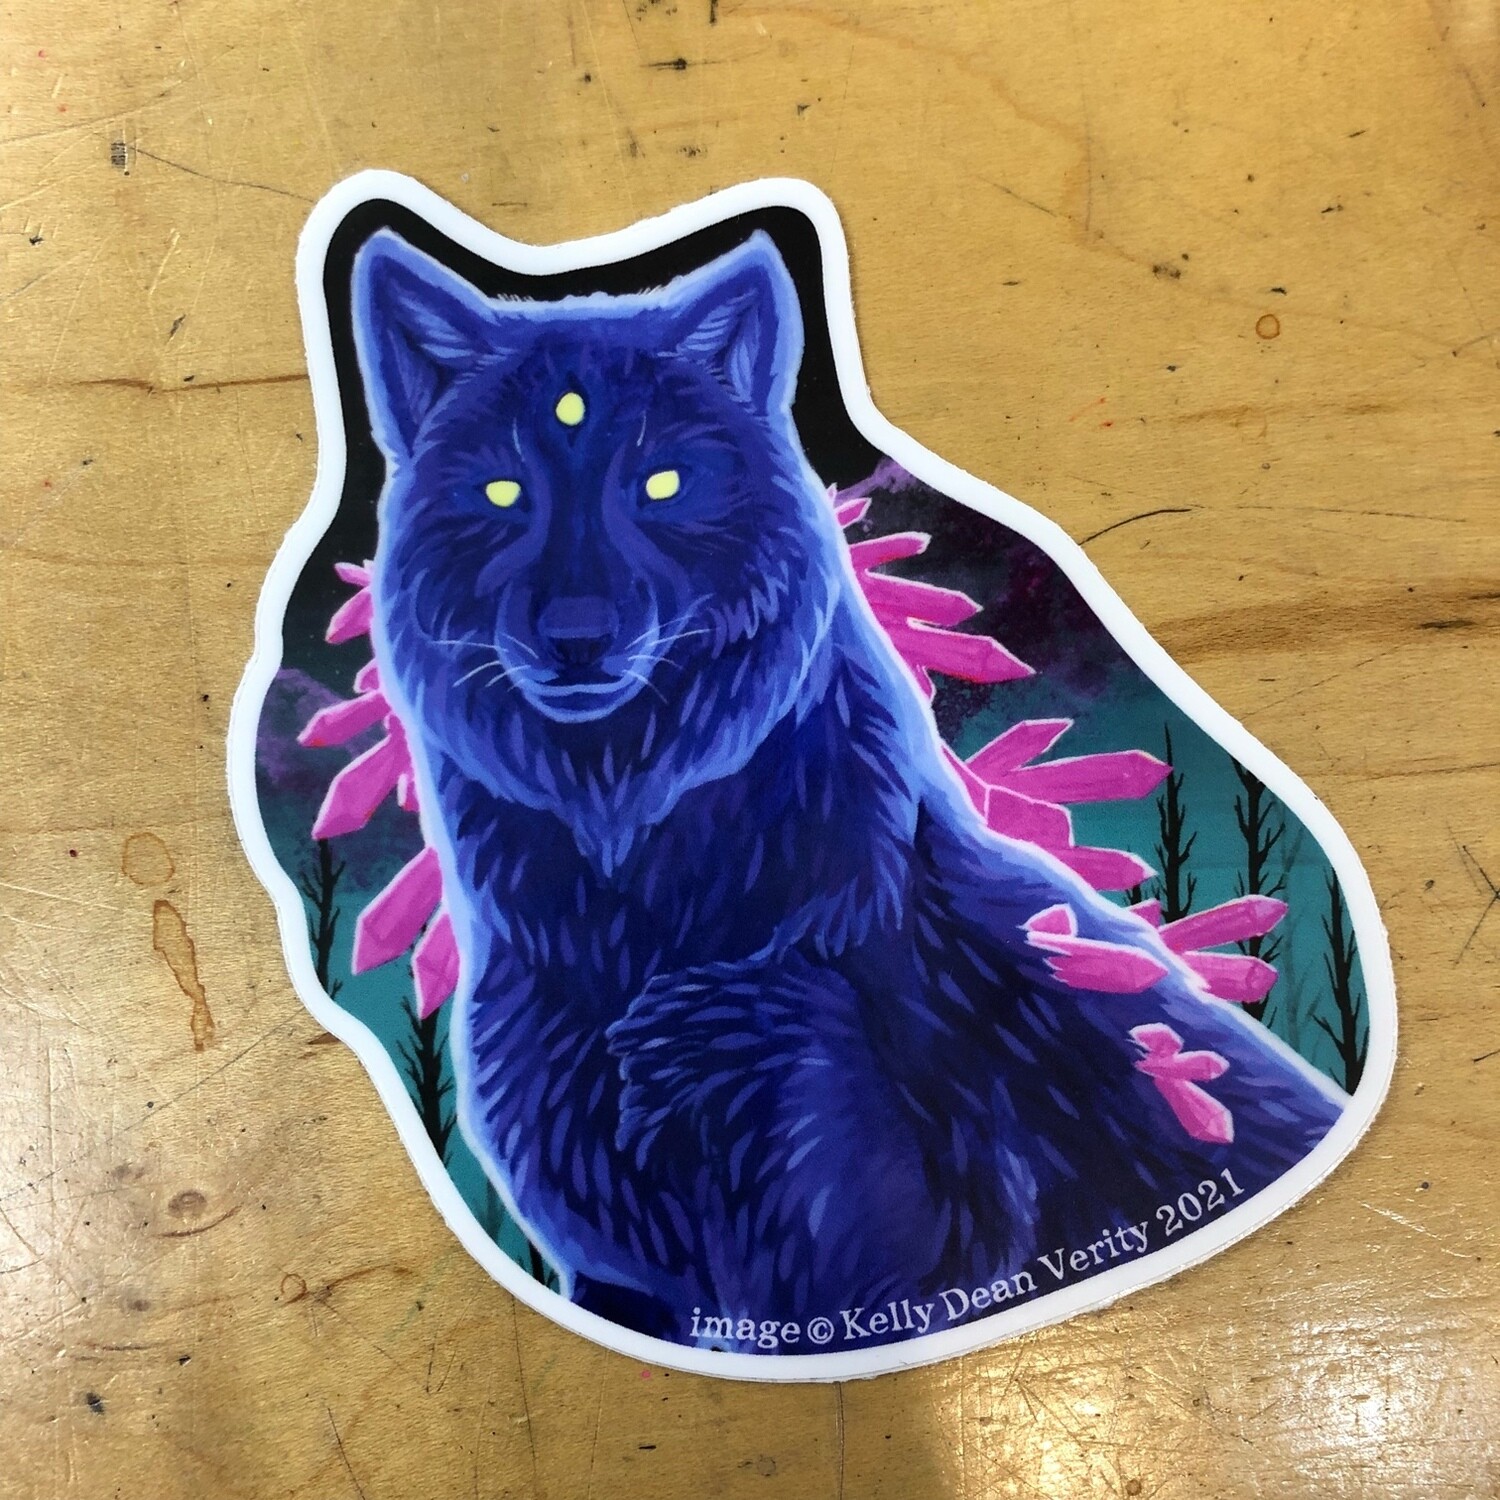 Lupine Vision - Sticker by Kelly Dean Verity